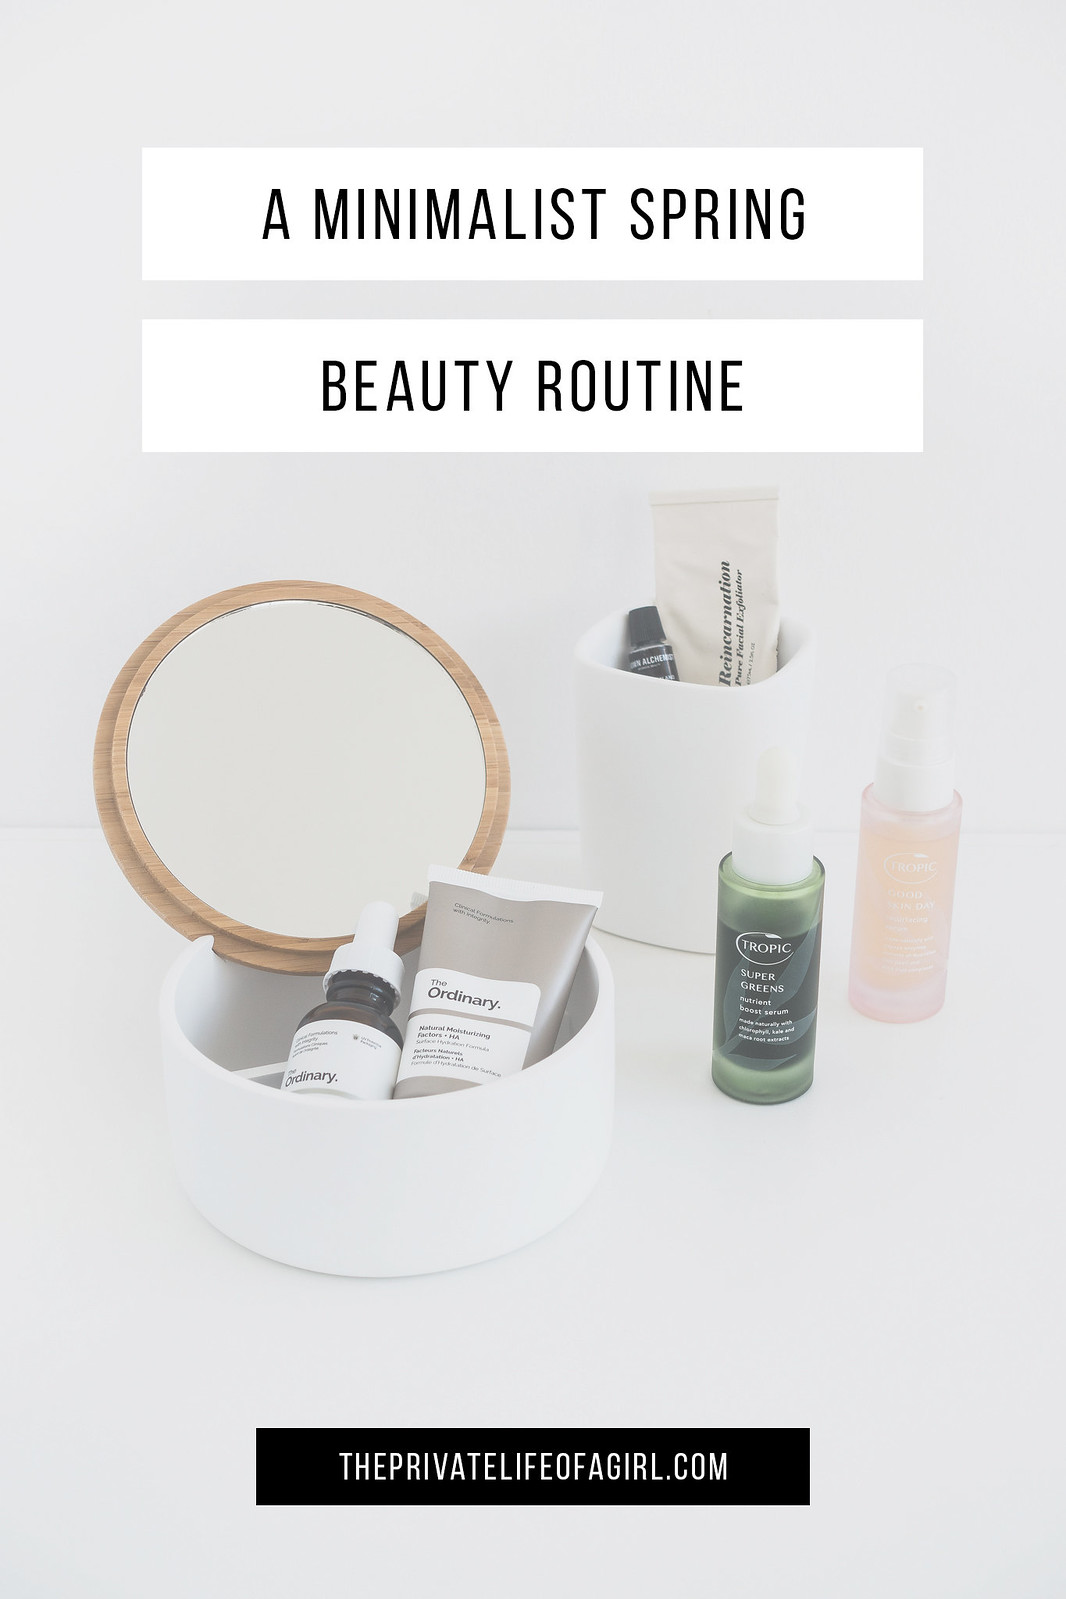 A Minimalist Spring Beauty Routine